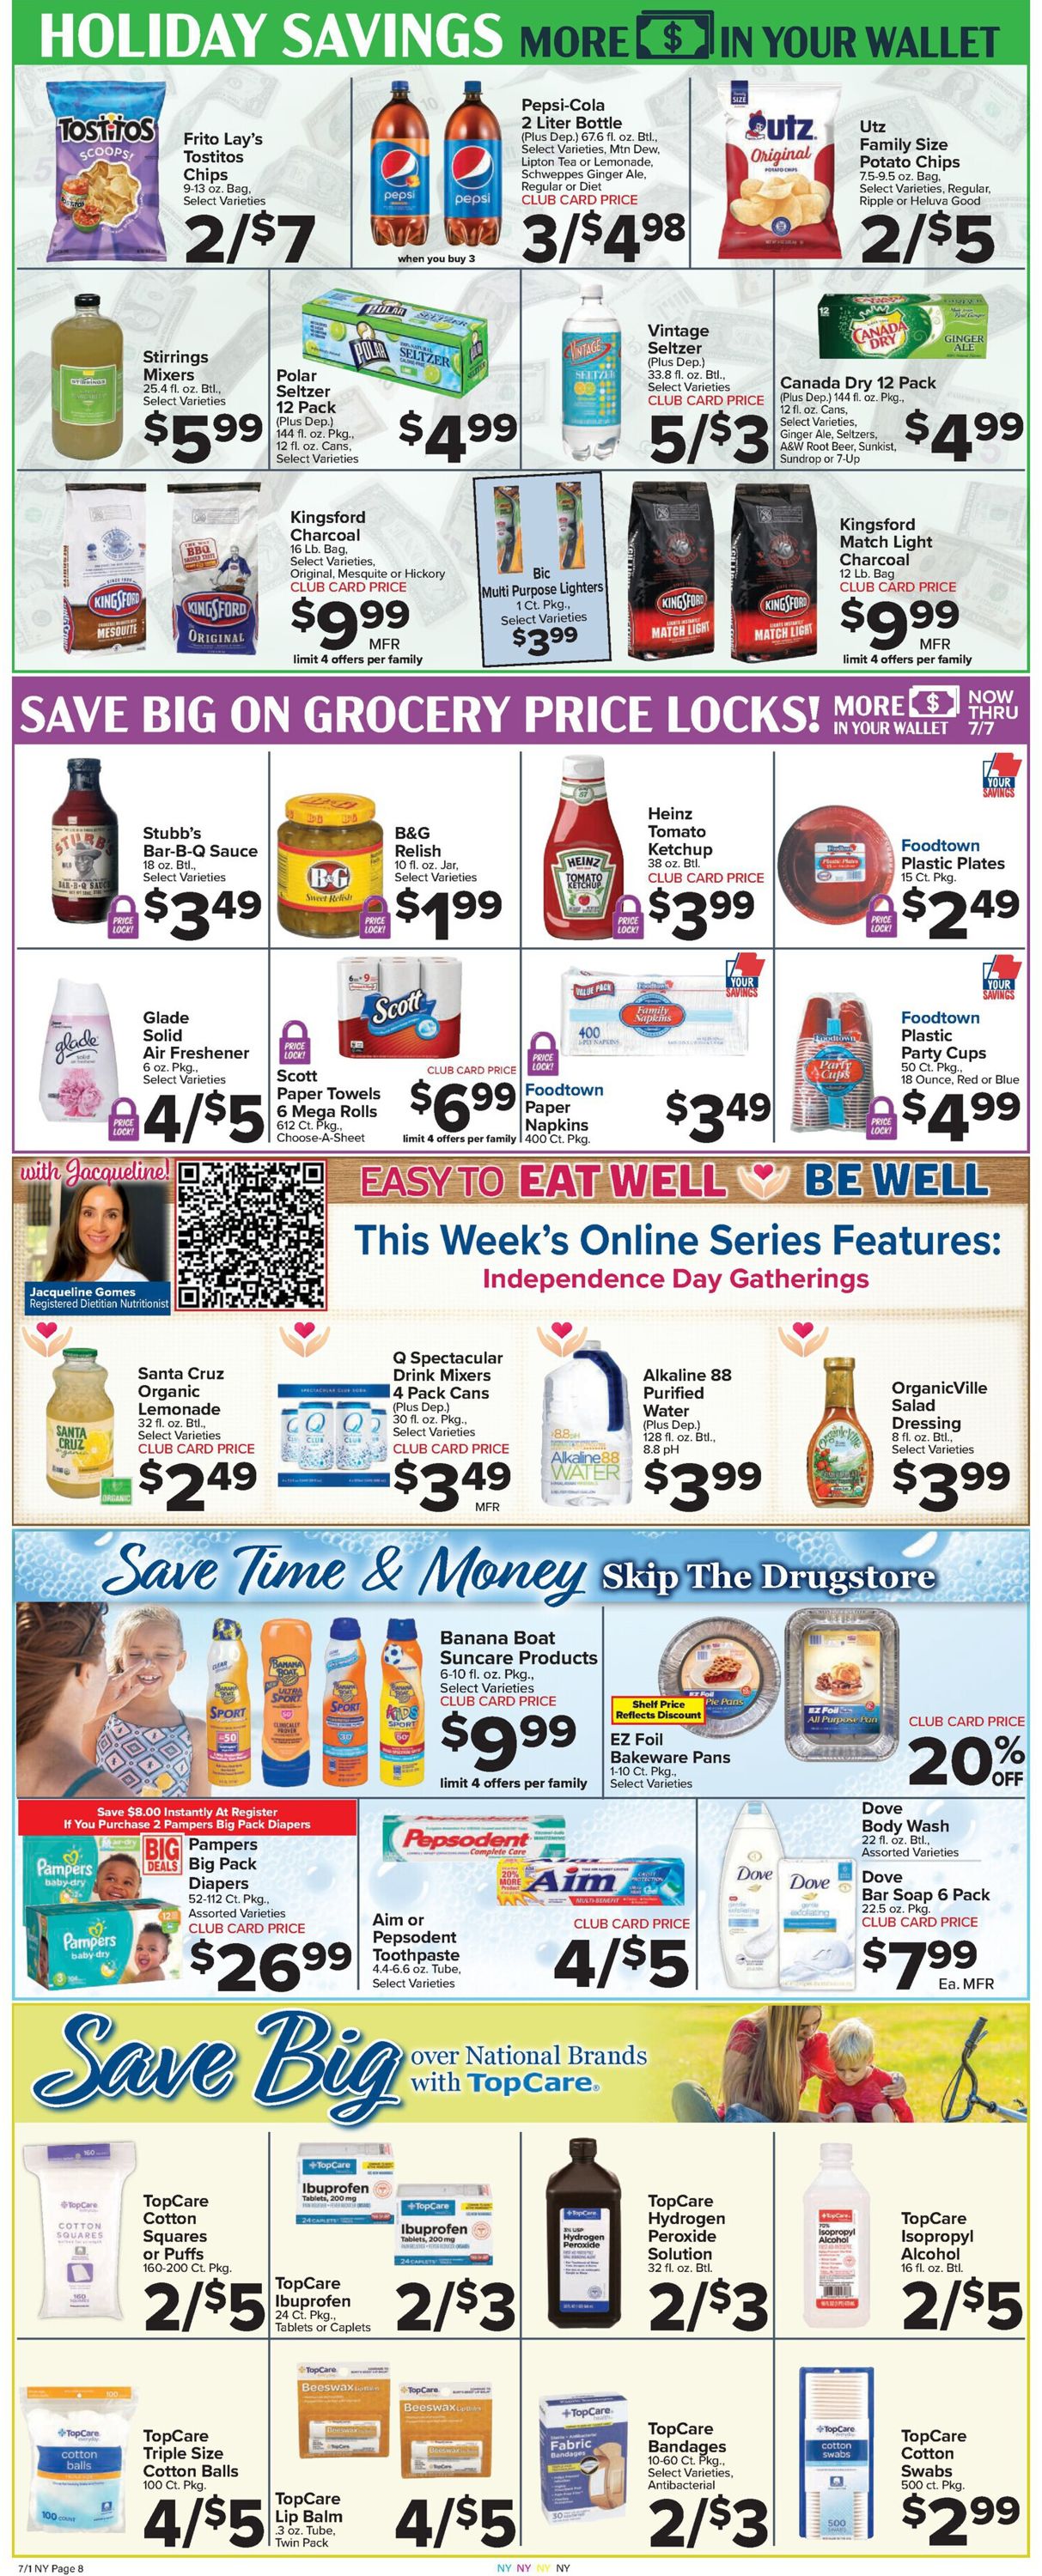 Catalogue Foodtown - 4th of July Sale from 07/01/2022